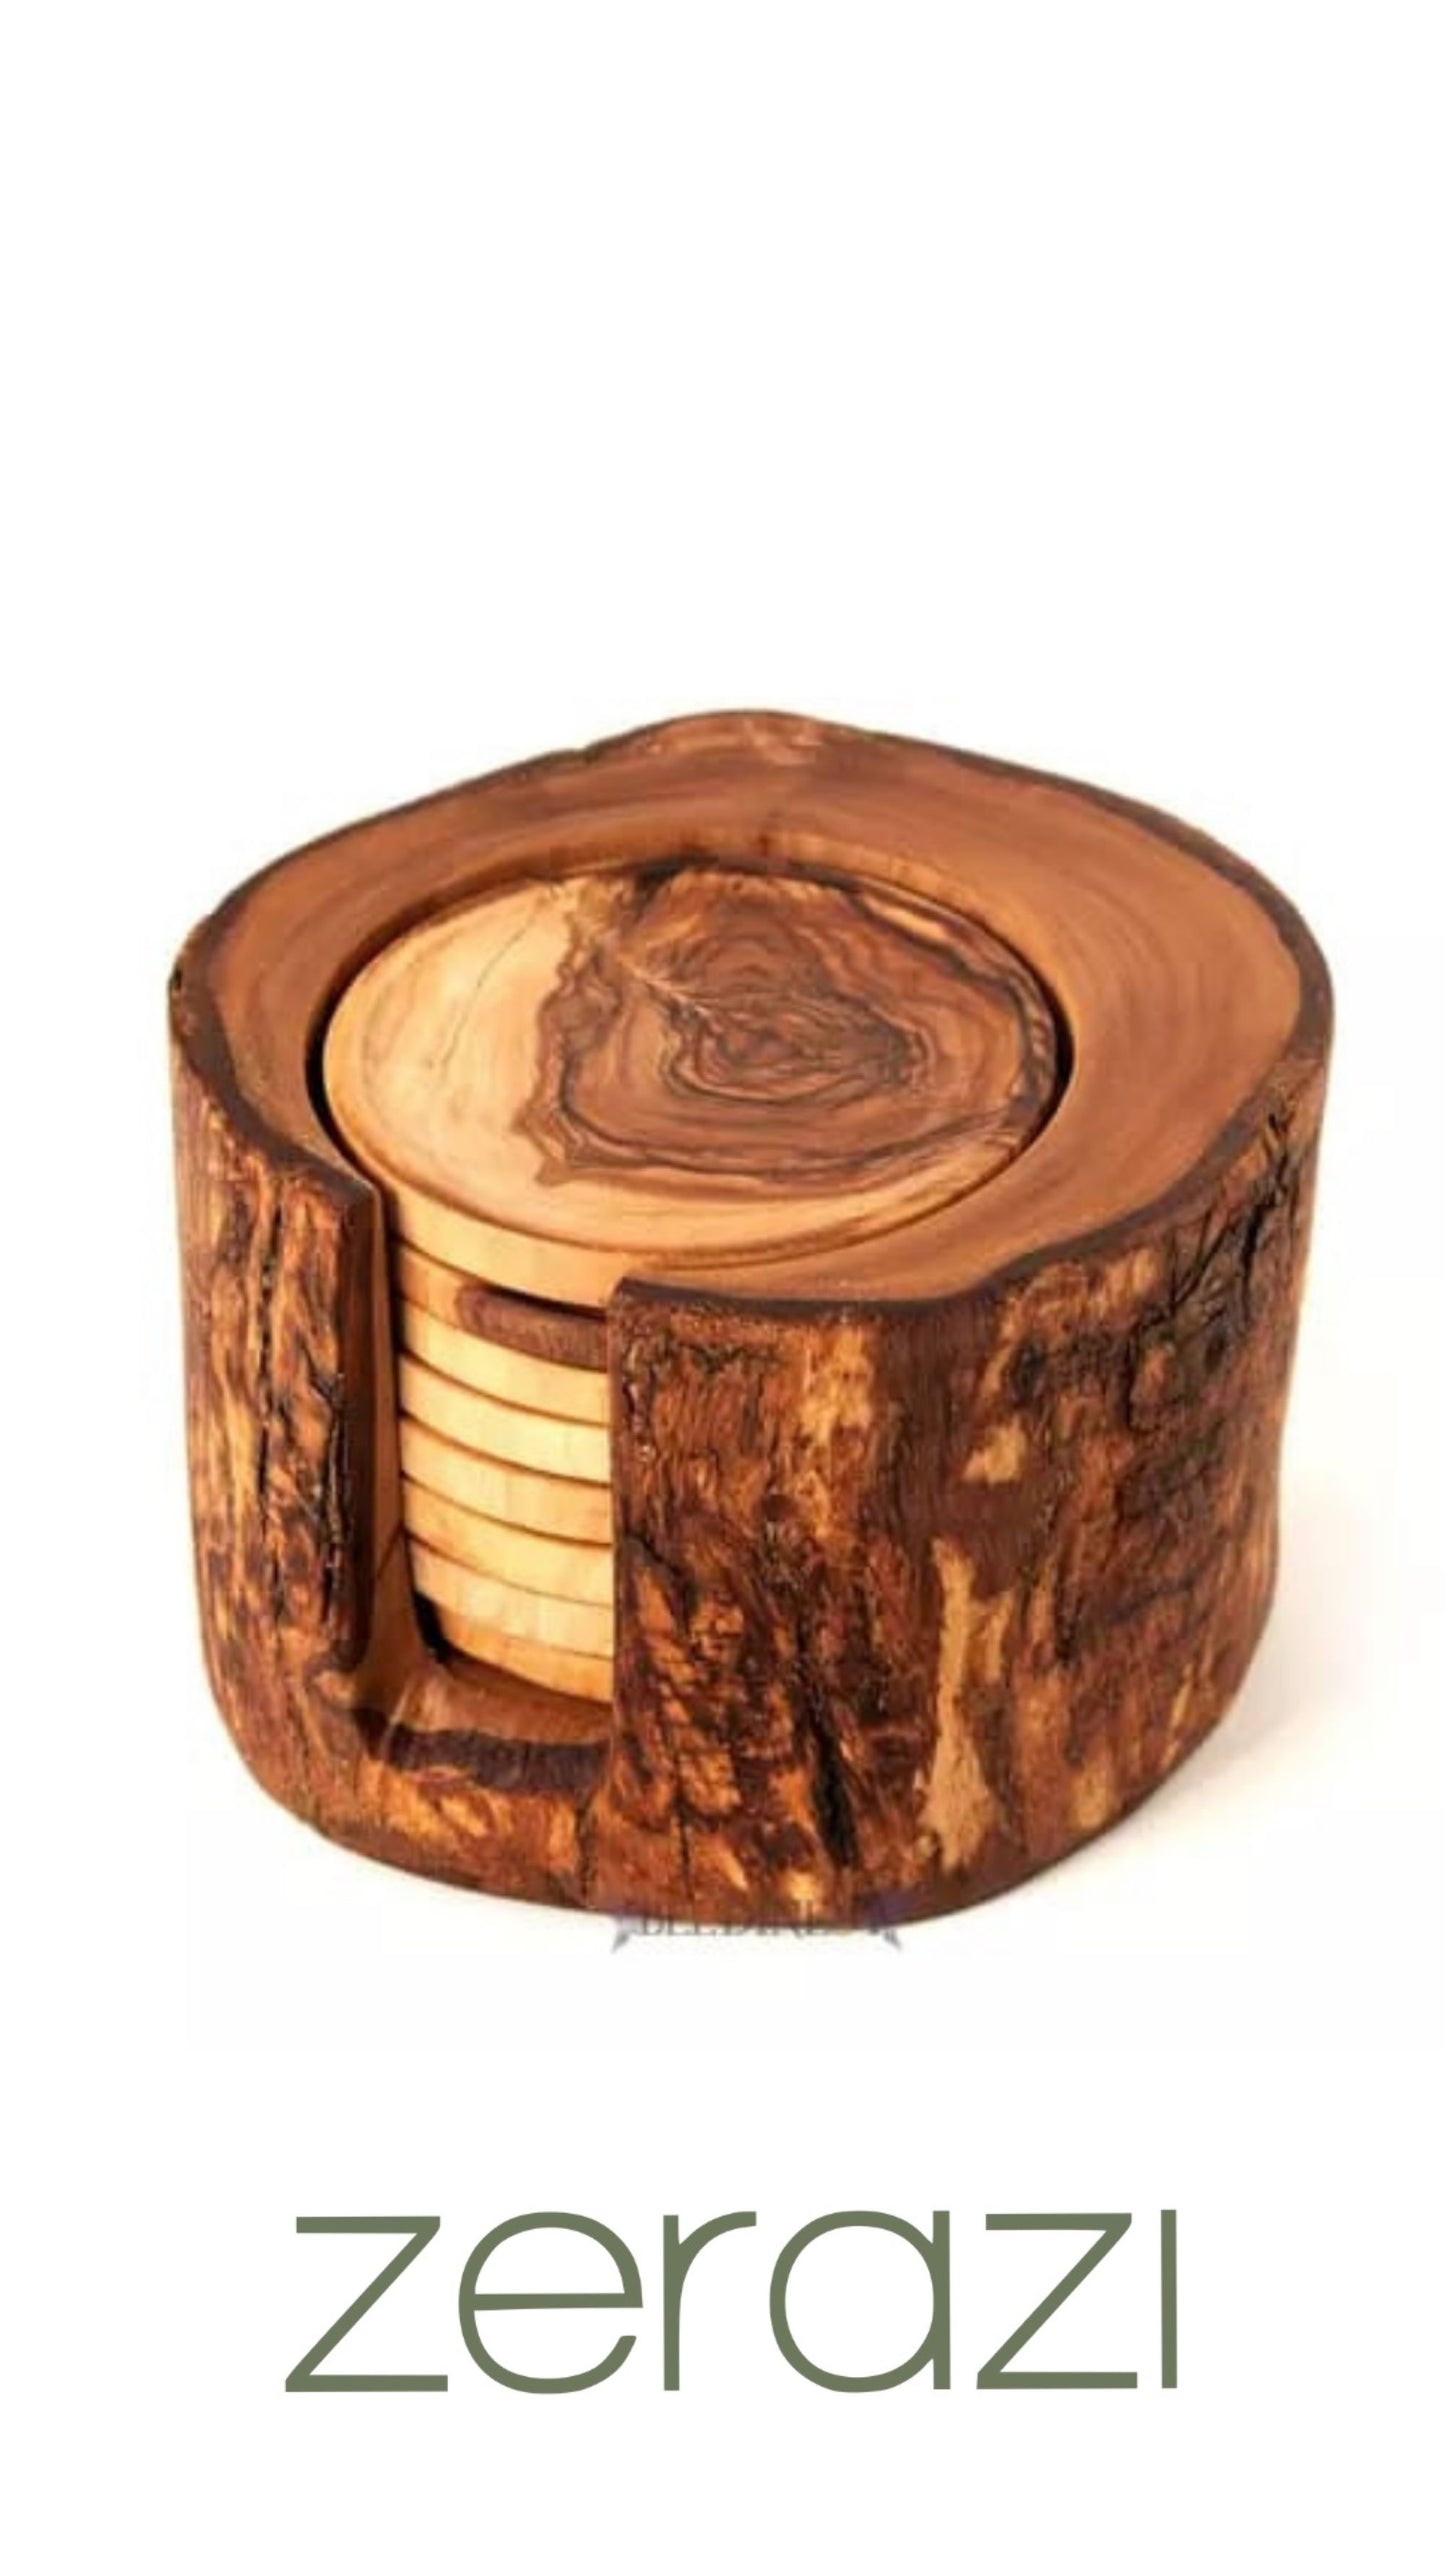 Set Of 6 coasters In A Rustic Box | Olive Wood | Entirely Handcrafted | Durable | Hygienic